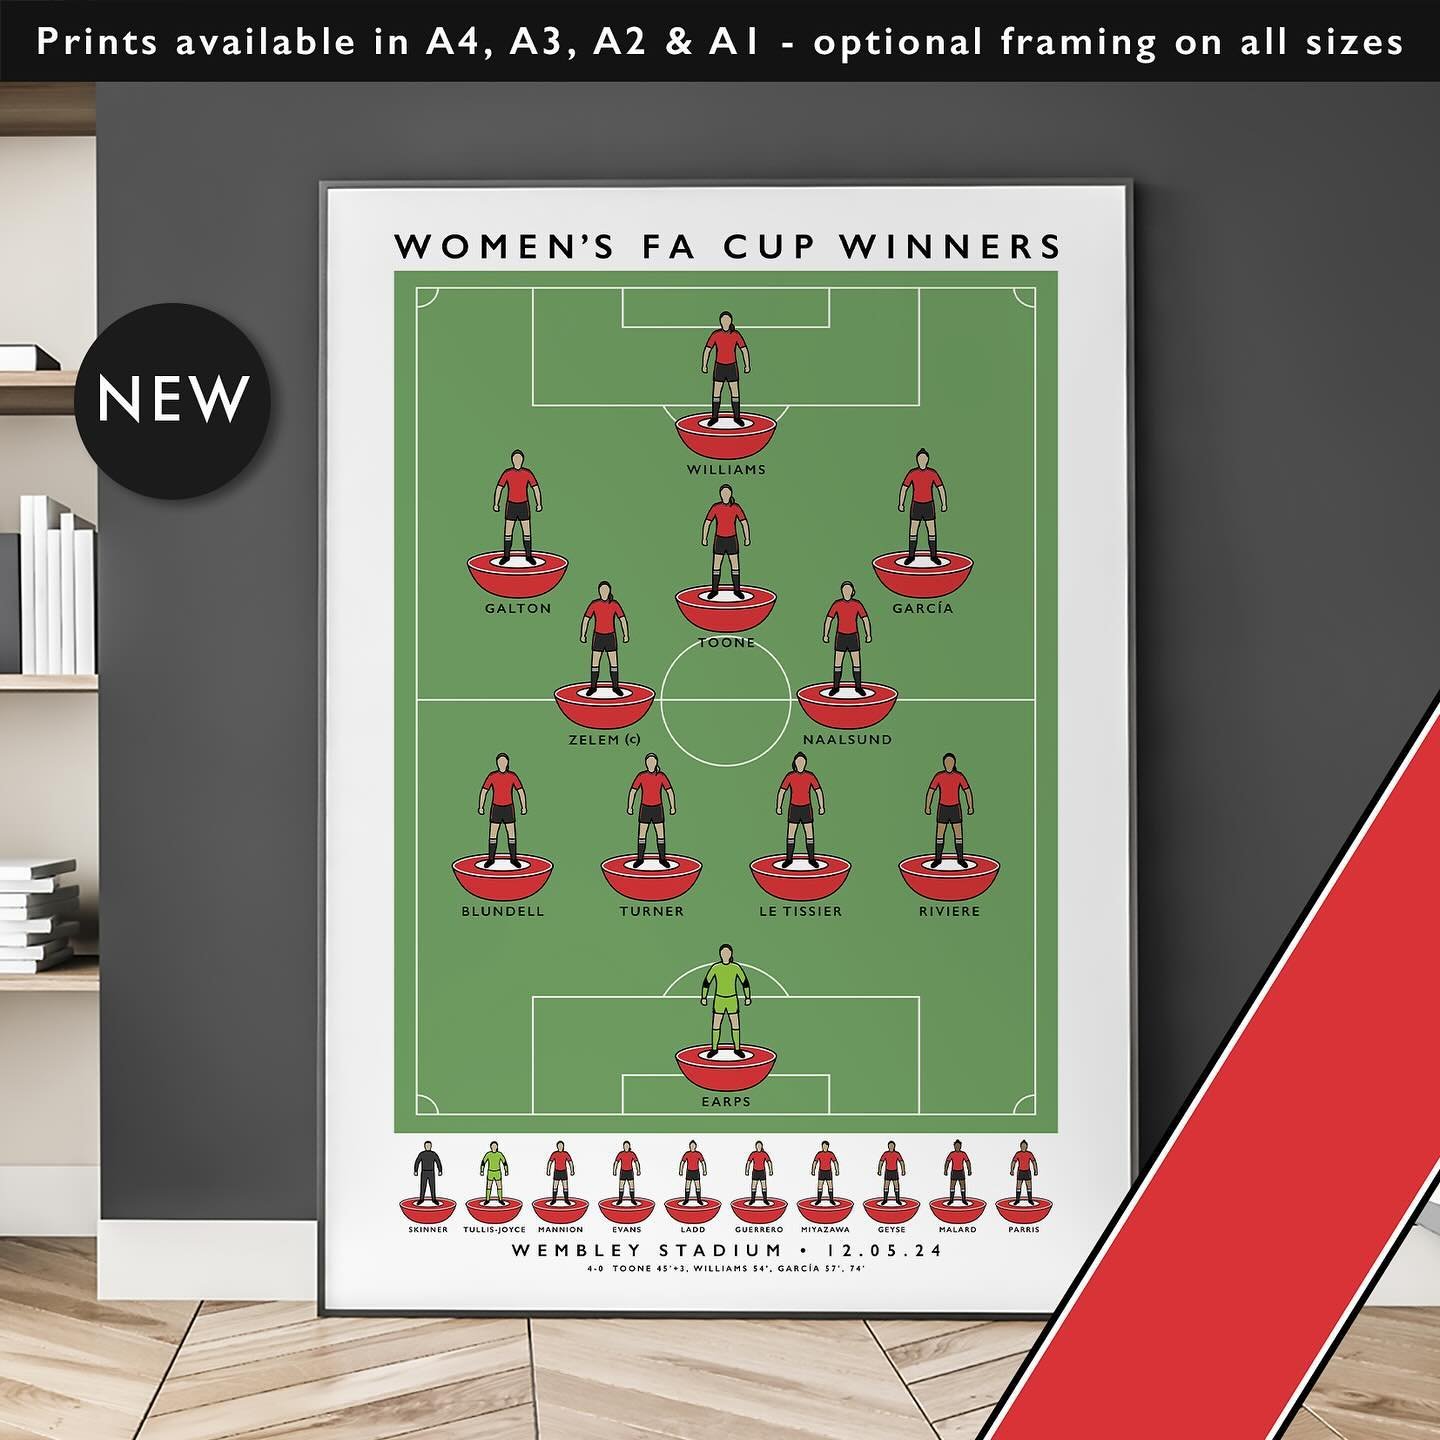 NEW: Manchester United Women FA Cup Winners 

Prints available in A4, A3, A2 &amp; A1 with optional framing 

Get 10% off until midnight with the discount code
THE-RED-DEVILS

Shop now: matthewjiwood.com/subbuteo-xis/m&hellip;

#MUWomen #WomensFACup 